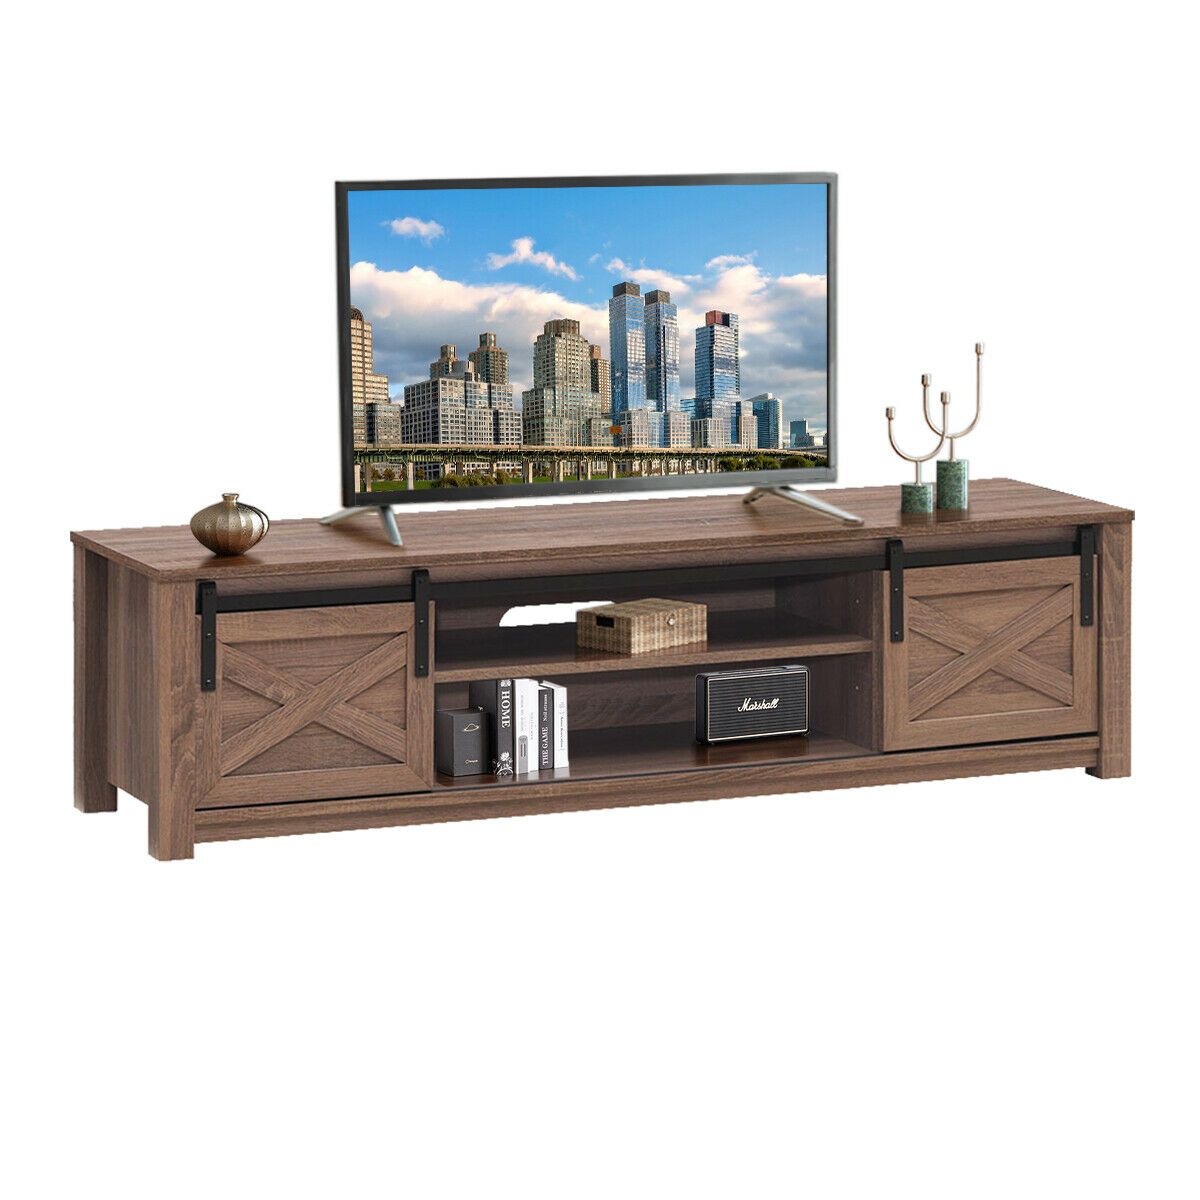 Gymax Sliding Barn Door Tv Stand For Tv's Up To 65 Throughout Jowers Tv Stands For Tvs Up To 65" (View 9 of 15)